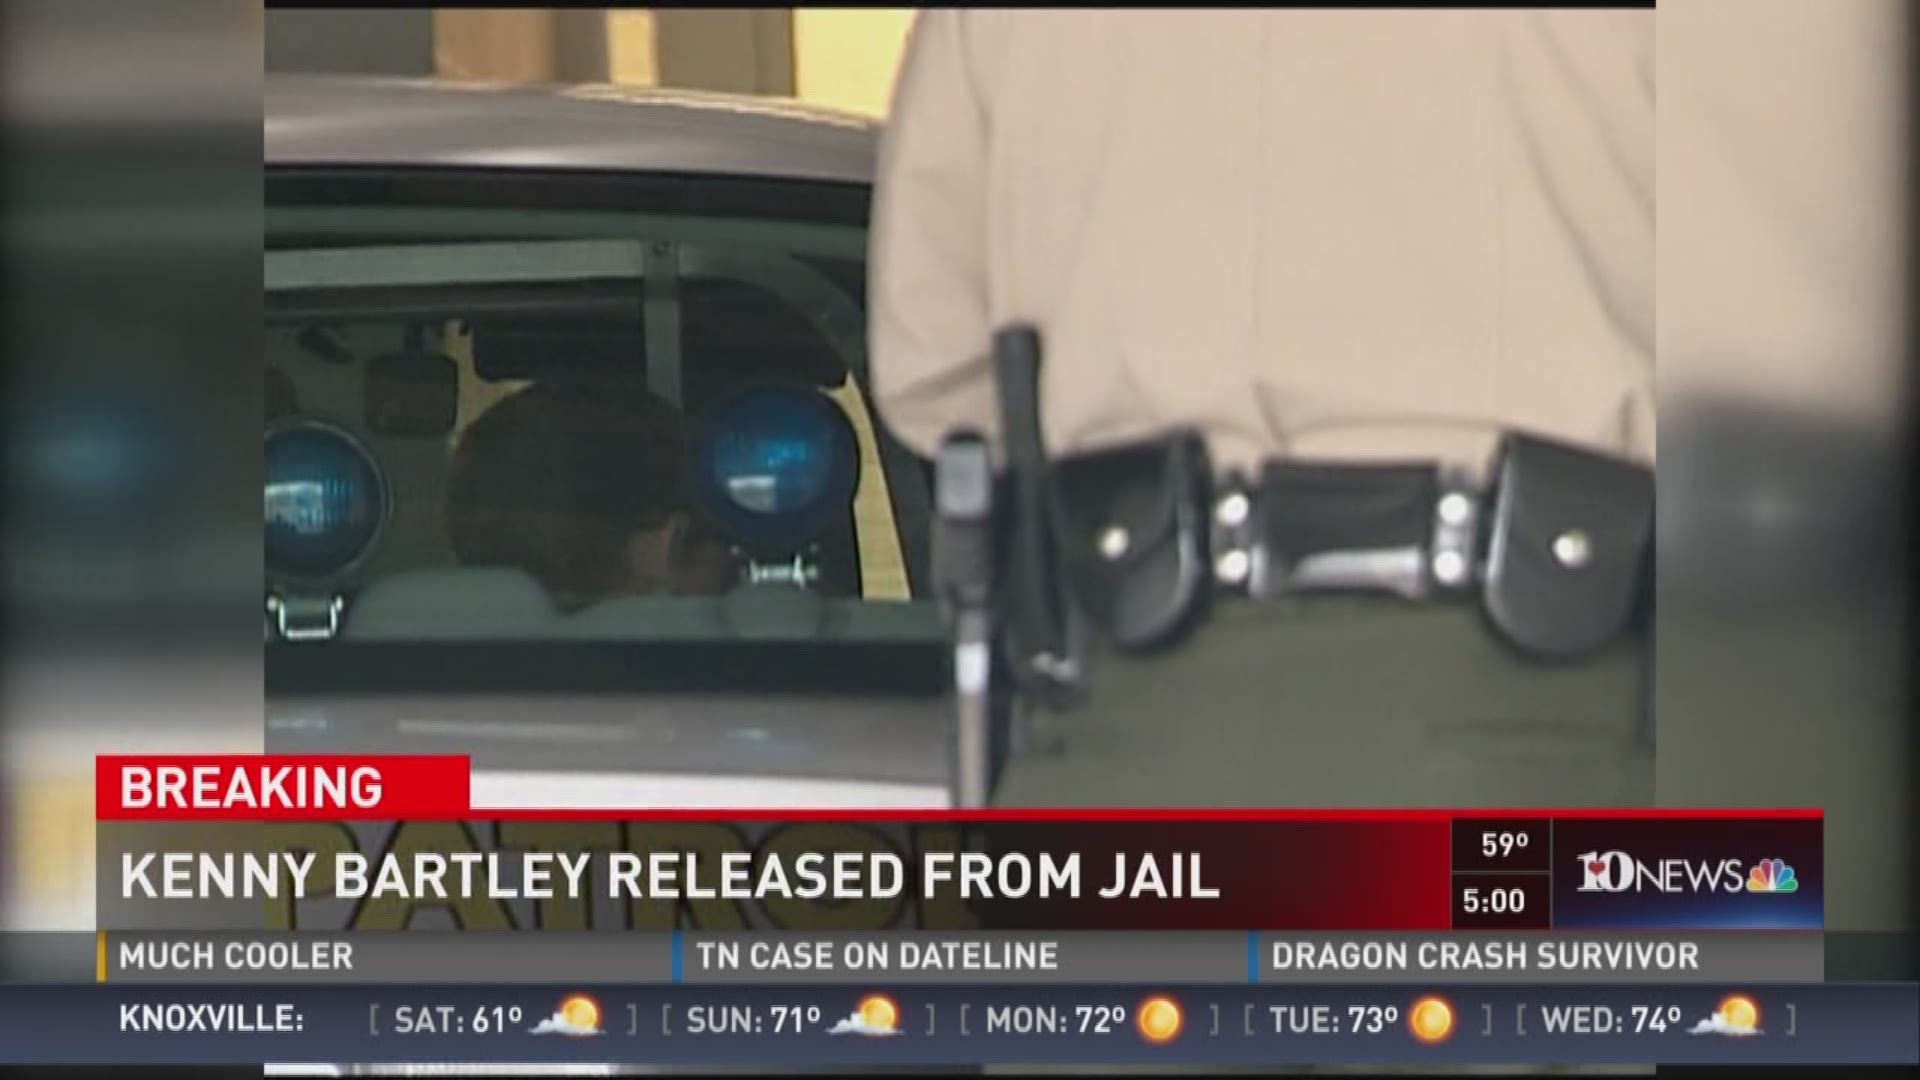 Bartley was serving time for probation violations from a misdemeanor assault. He was convicted of reckless homicide in the 2005 shooting at Campbell Co. High School.